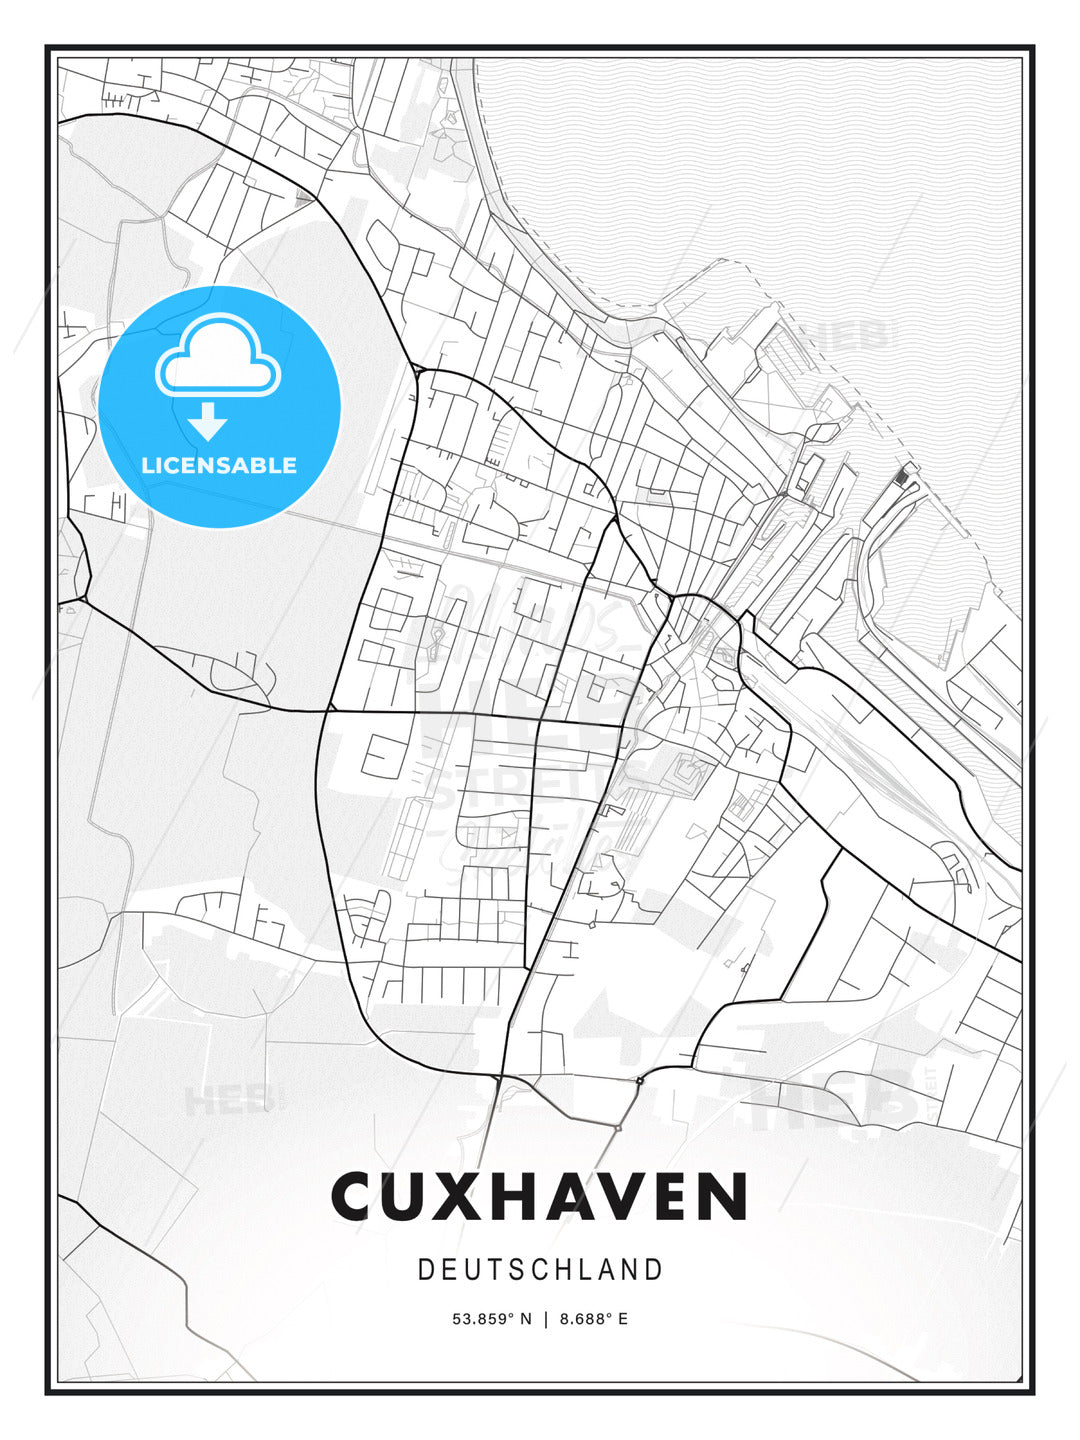 Cuxhaven, Germany, Modern Print Template in Various Formats - HEBSTREITS Sketches